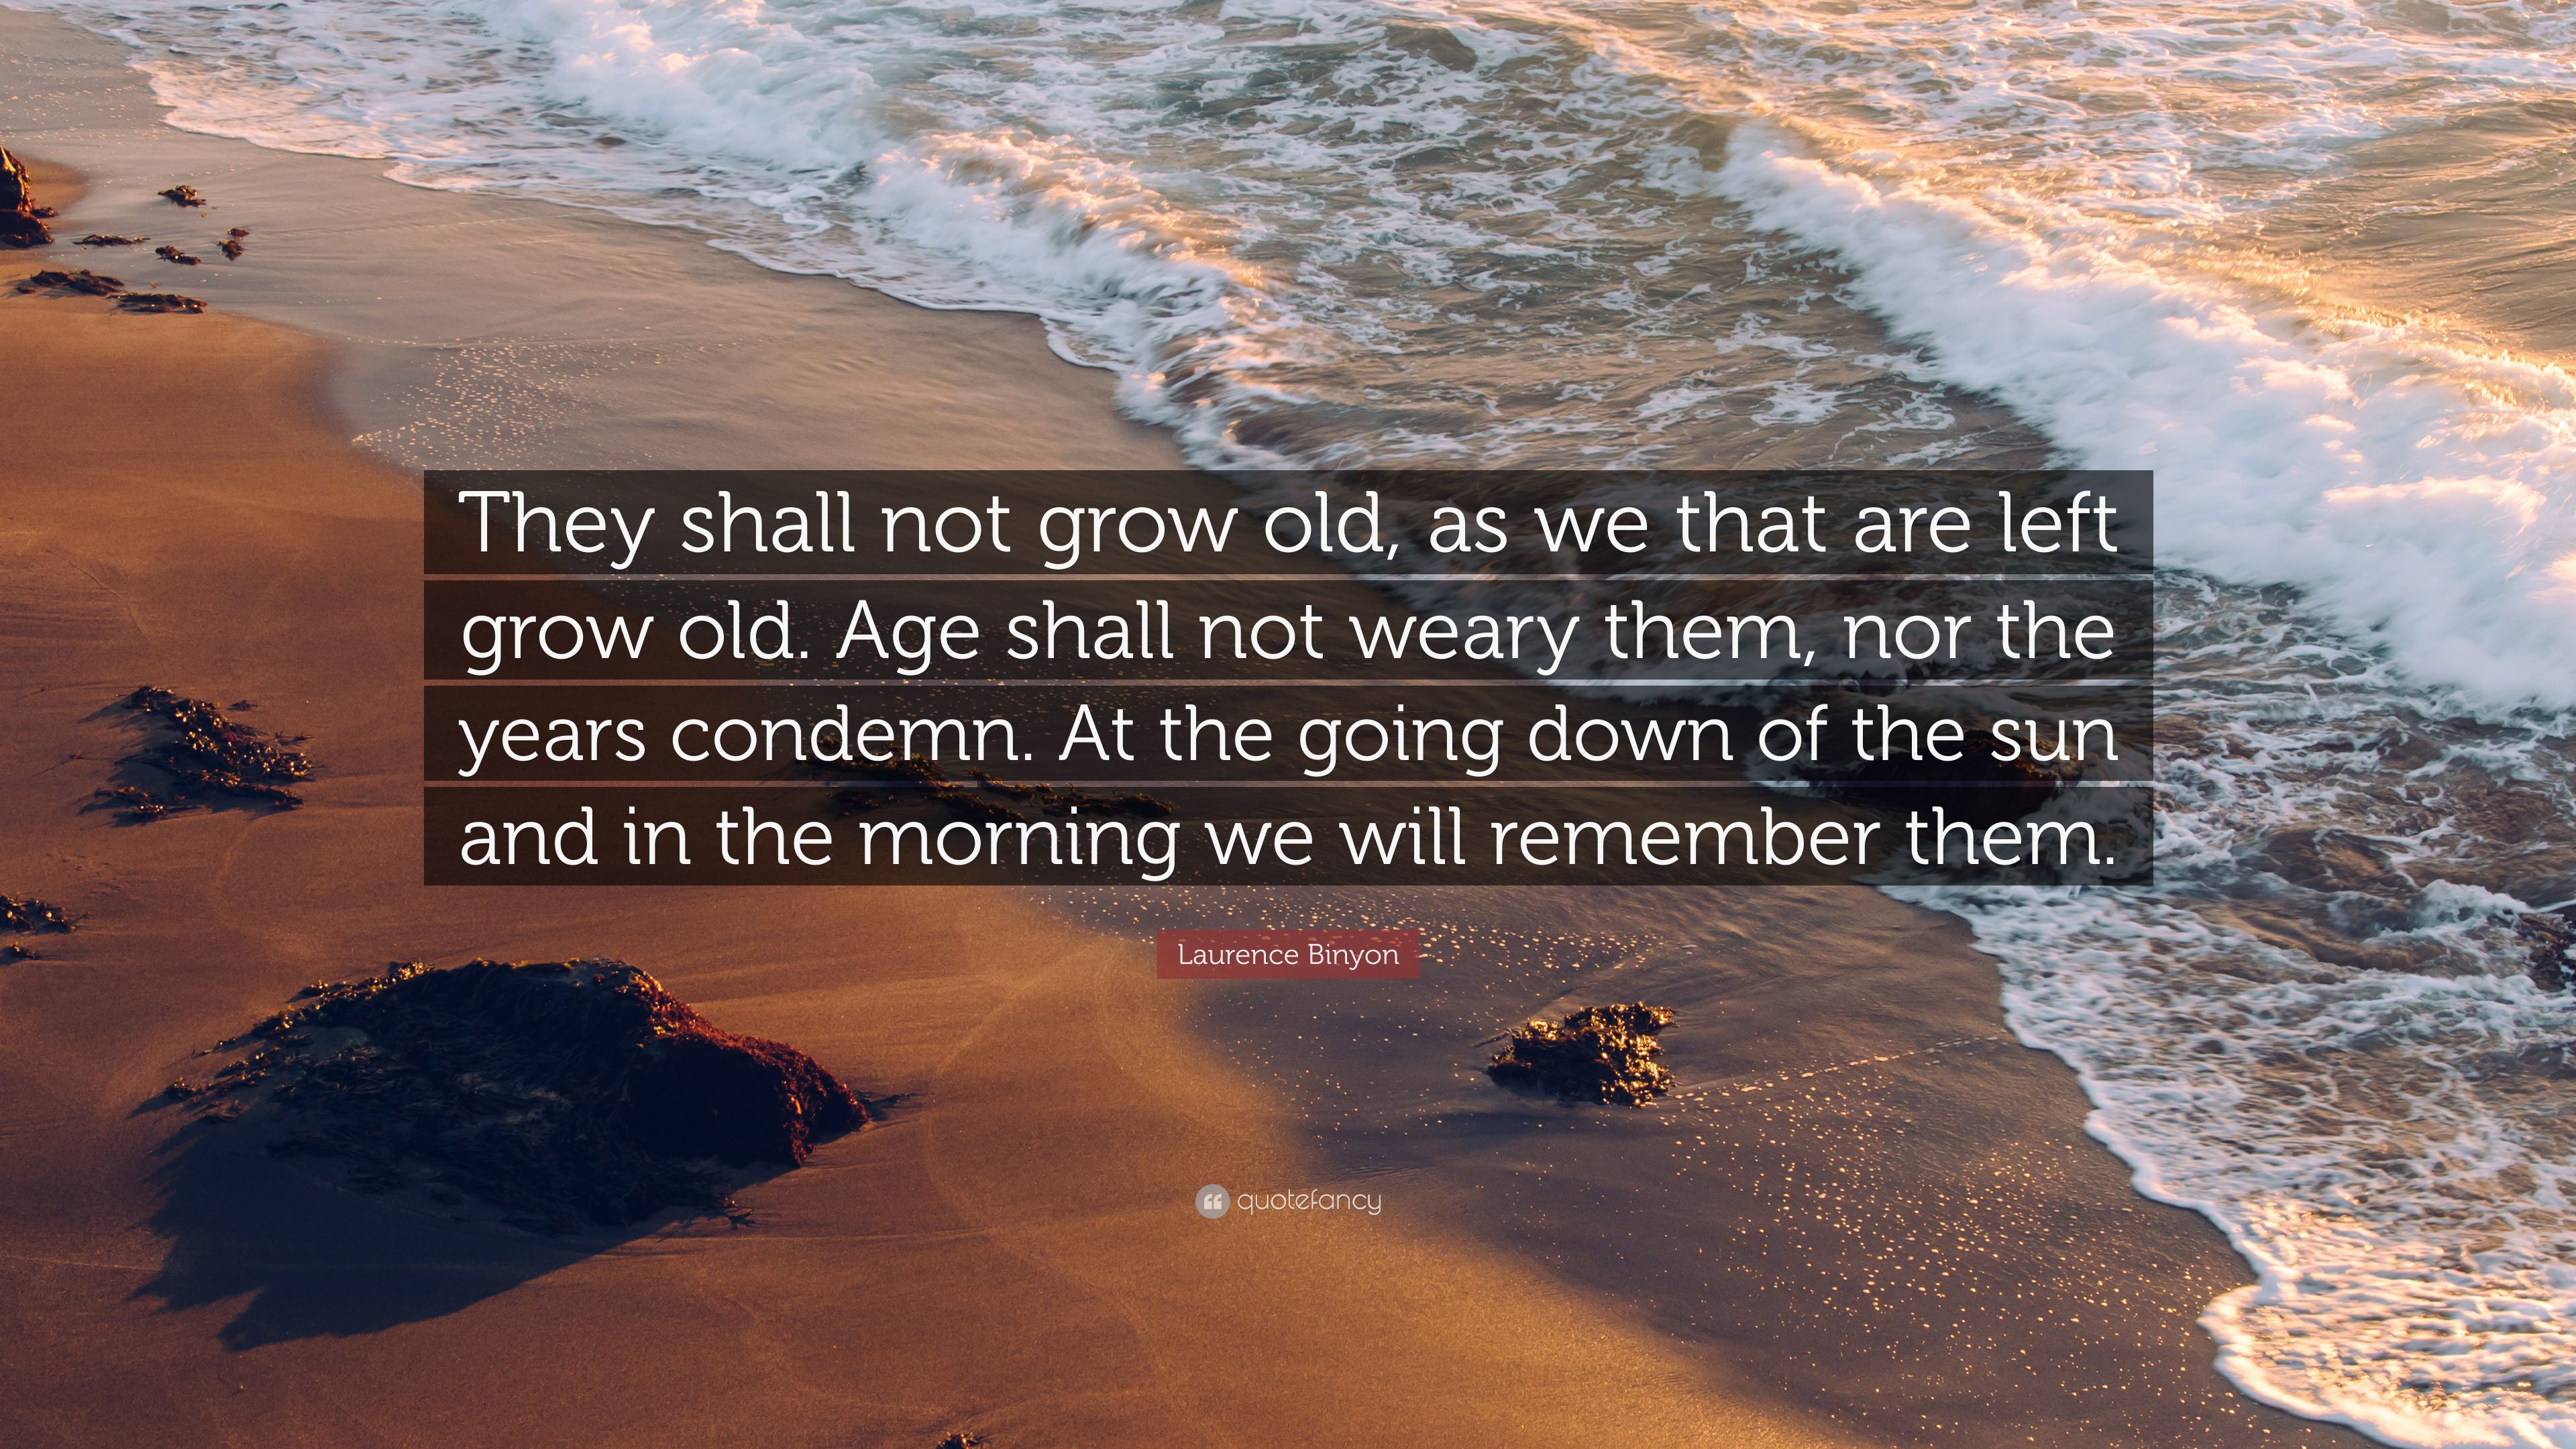 Laurence Binyon Quote: “They shall not grow old, as we that are left